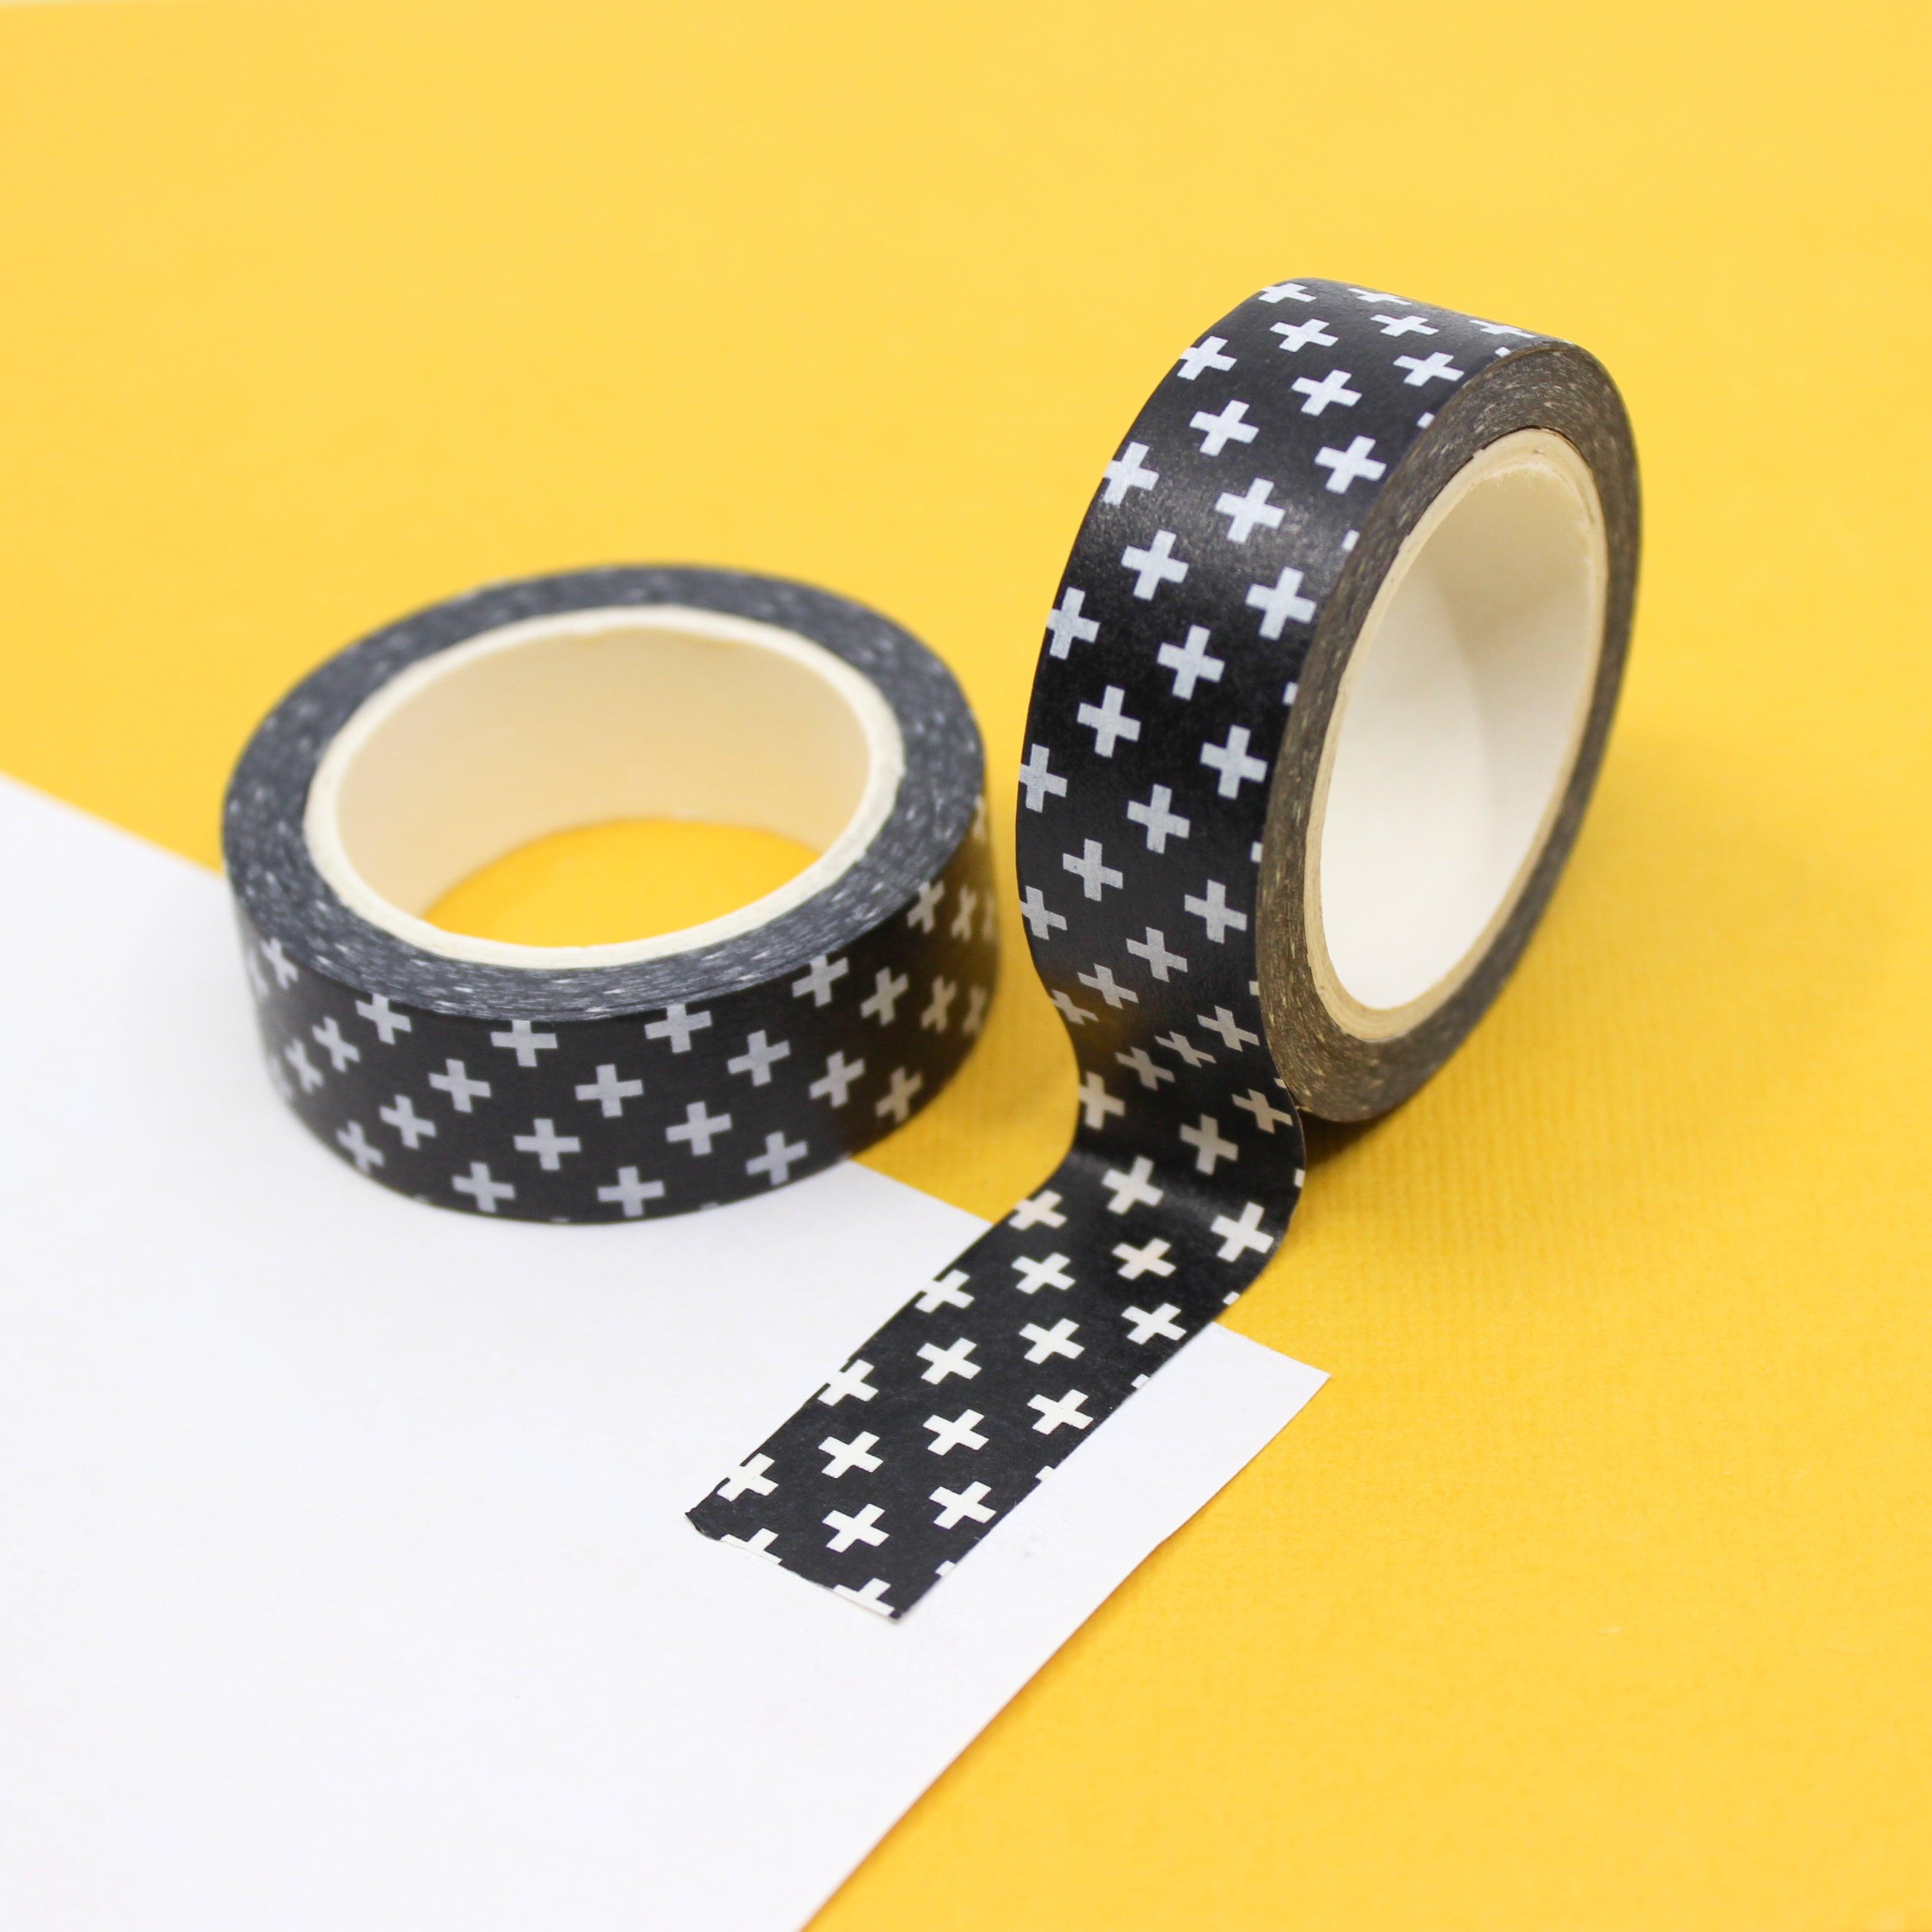 This is a black and white swiss cross pattern view themed washi tape from BBB Supplies Craft Shop